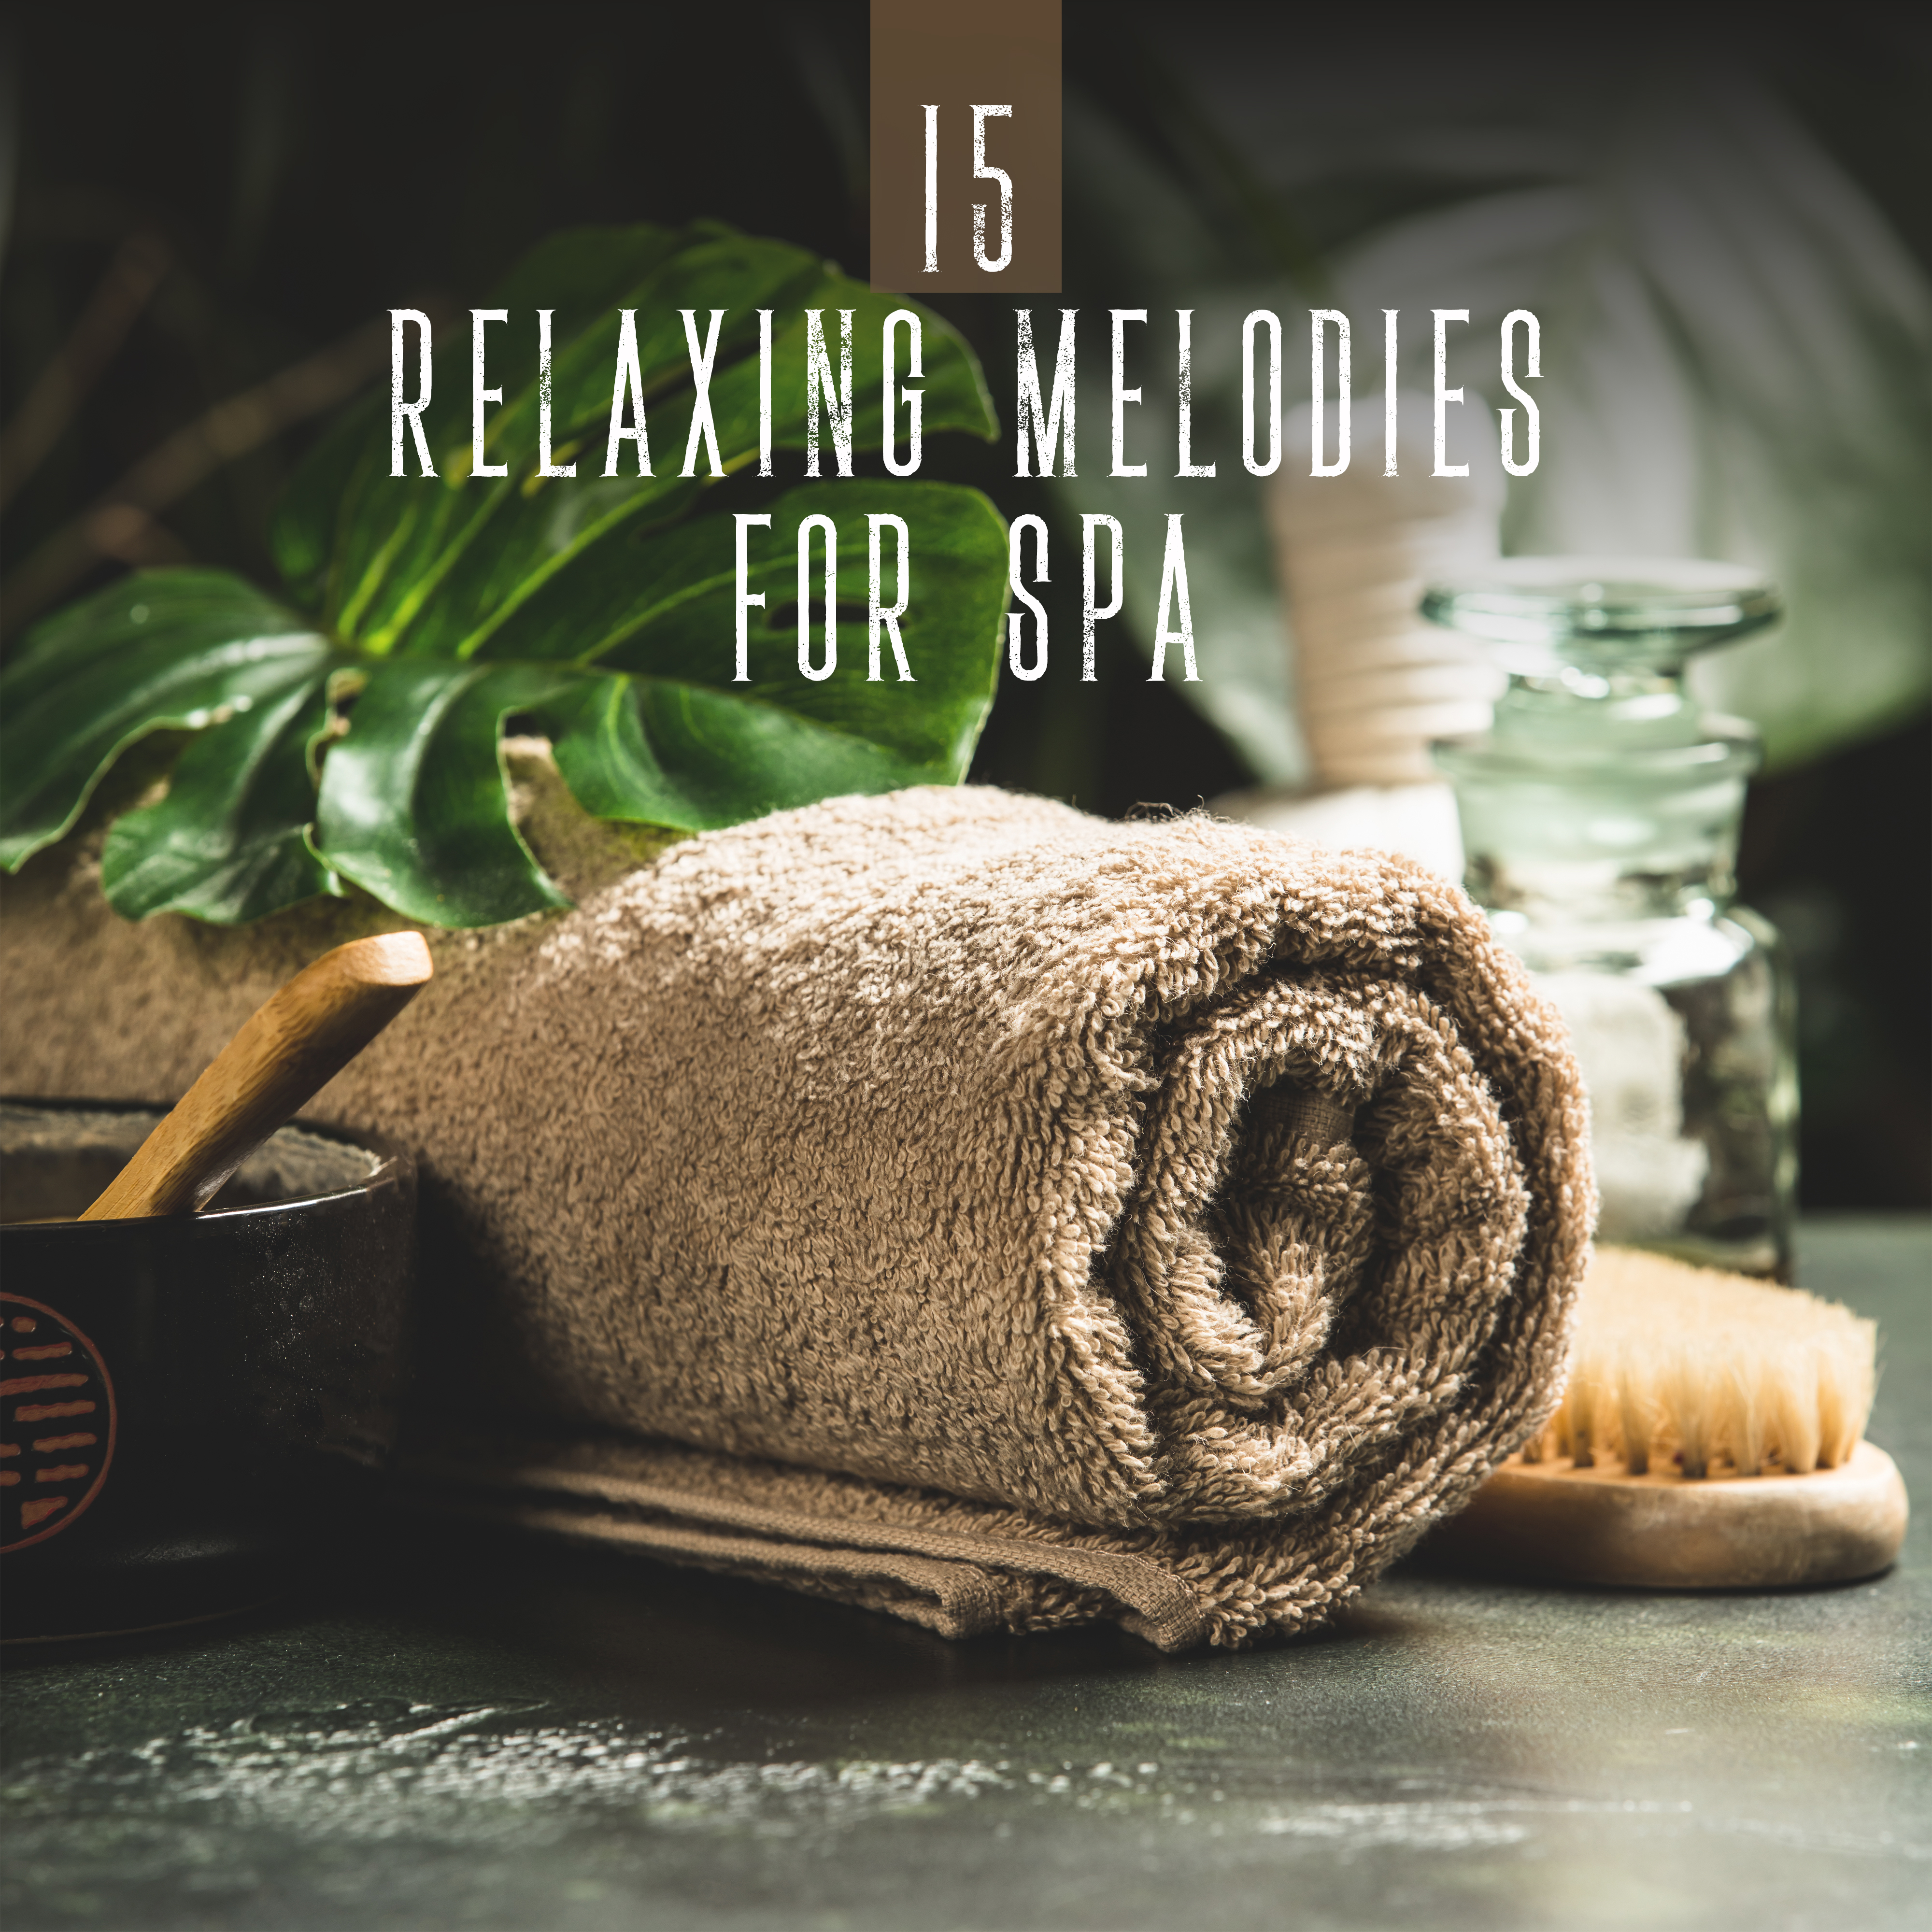 15 Relaxing Melodies for Spa